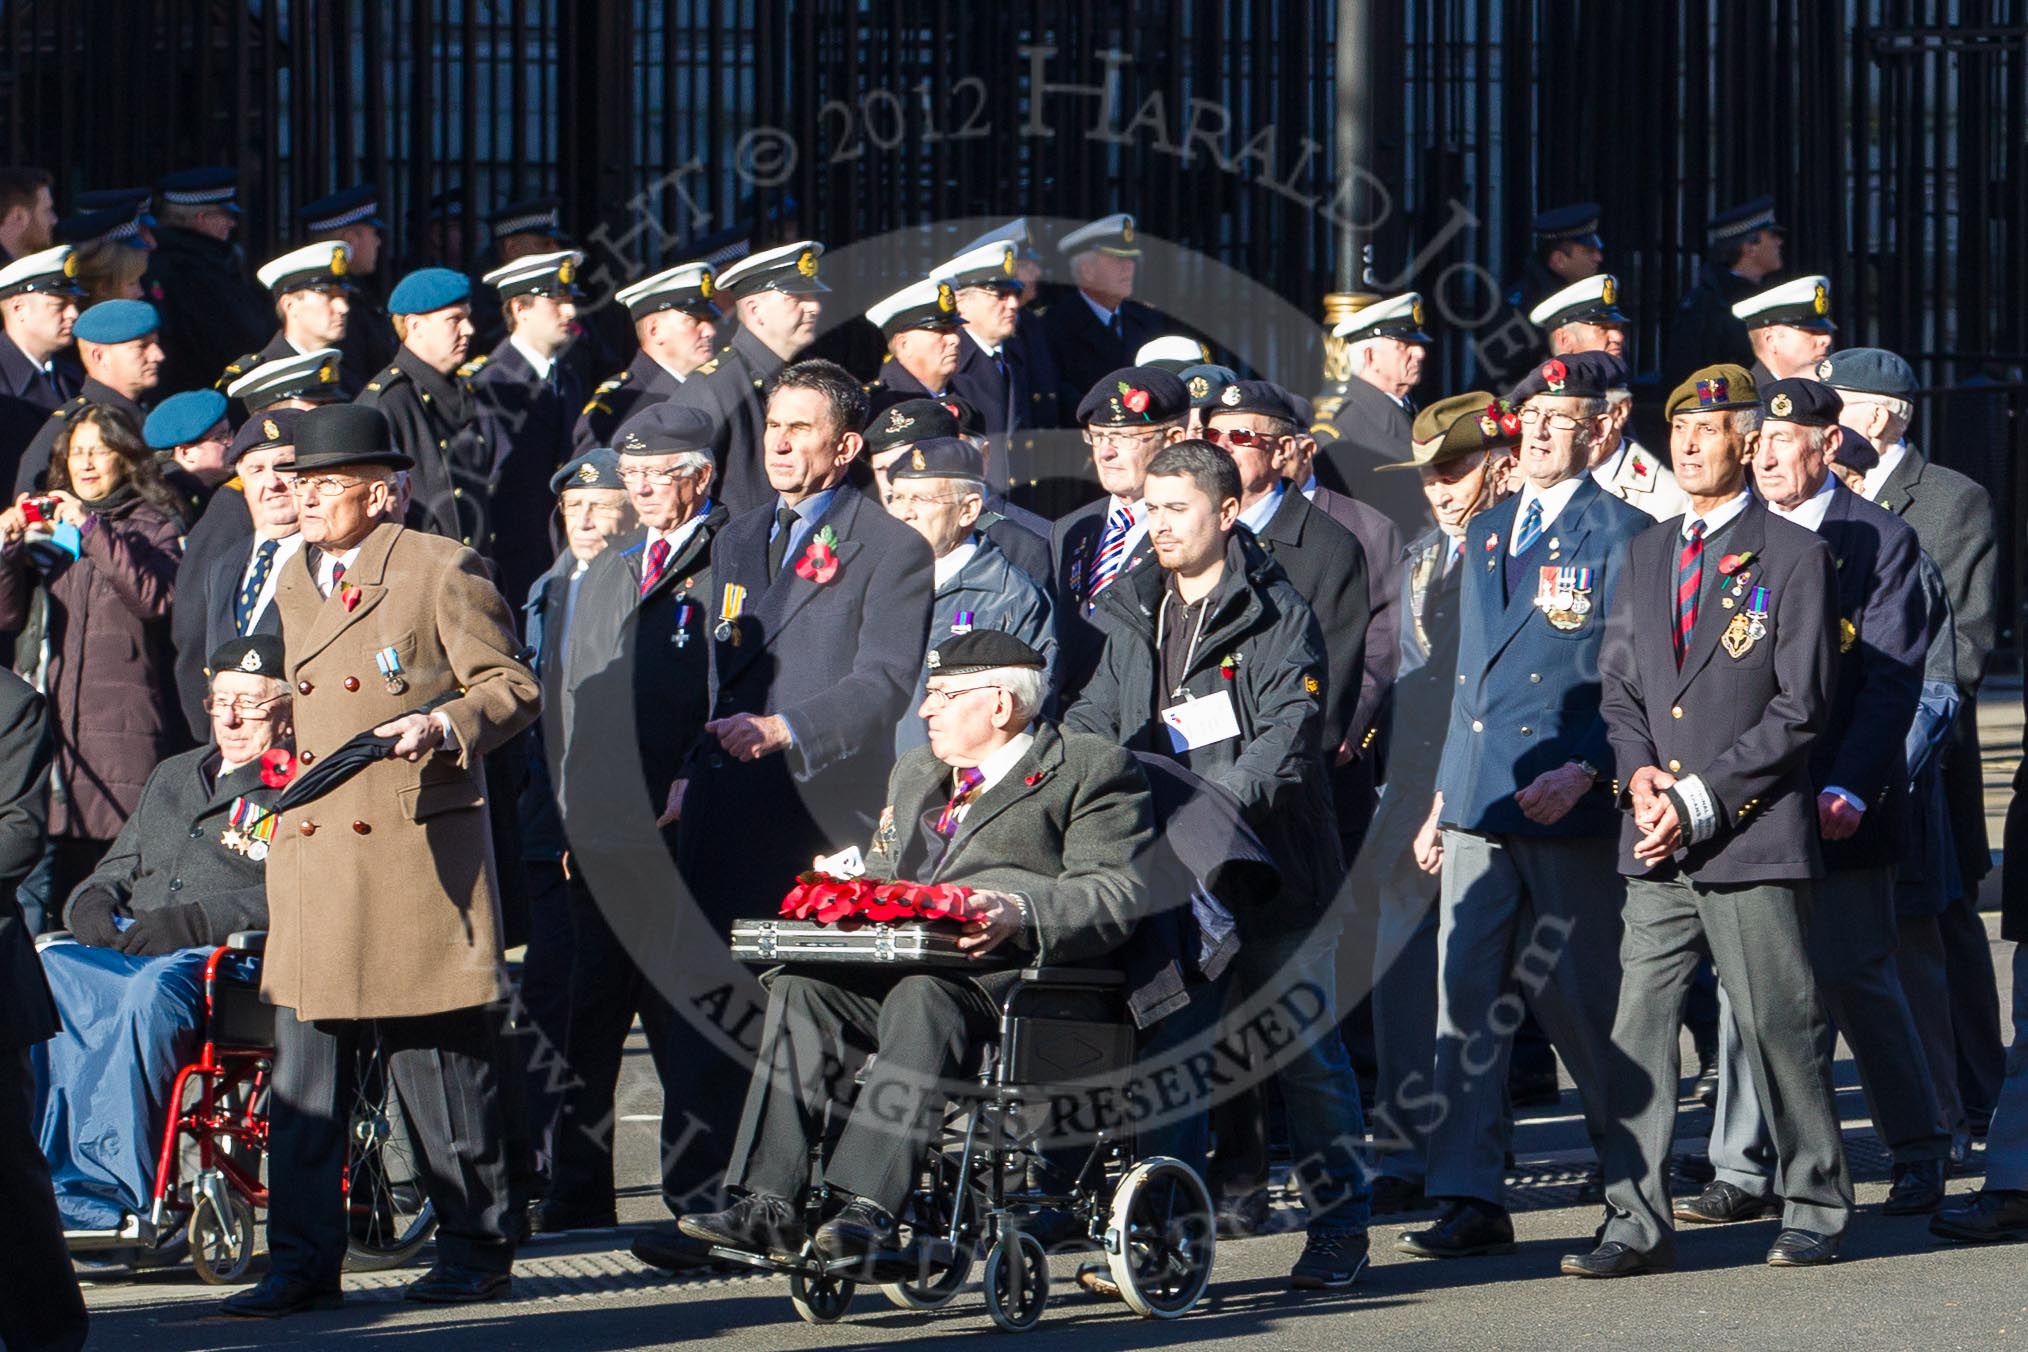 Remembrance Sunday 2012 Cenotaph March Past: Group F10 - National Service Veterans Alliance..
Whitehall, Cenotaph,
London SW1,

United Kingdom,
on 11 November 2012 at 11:46, image #446